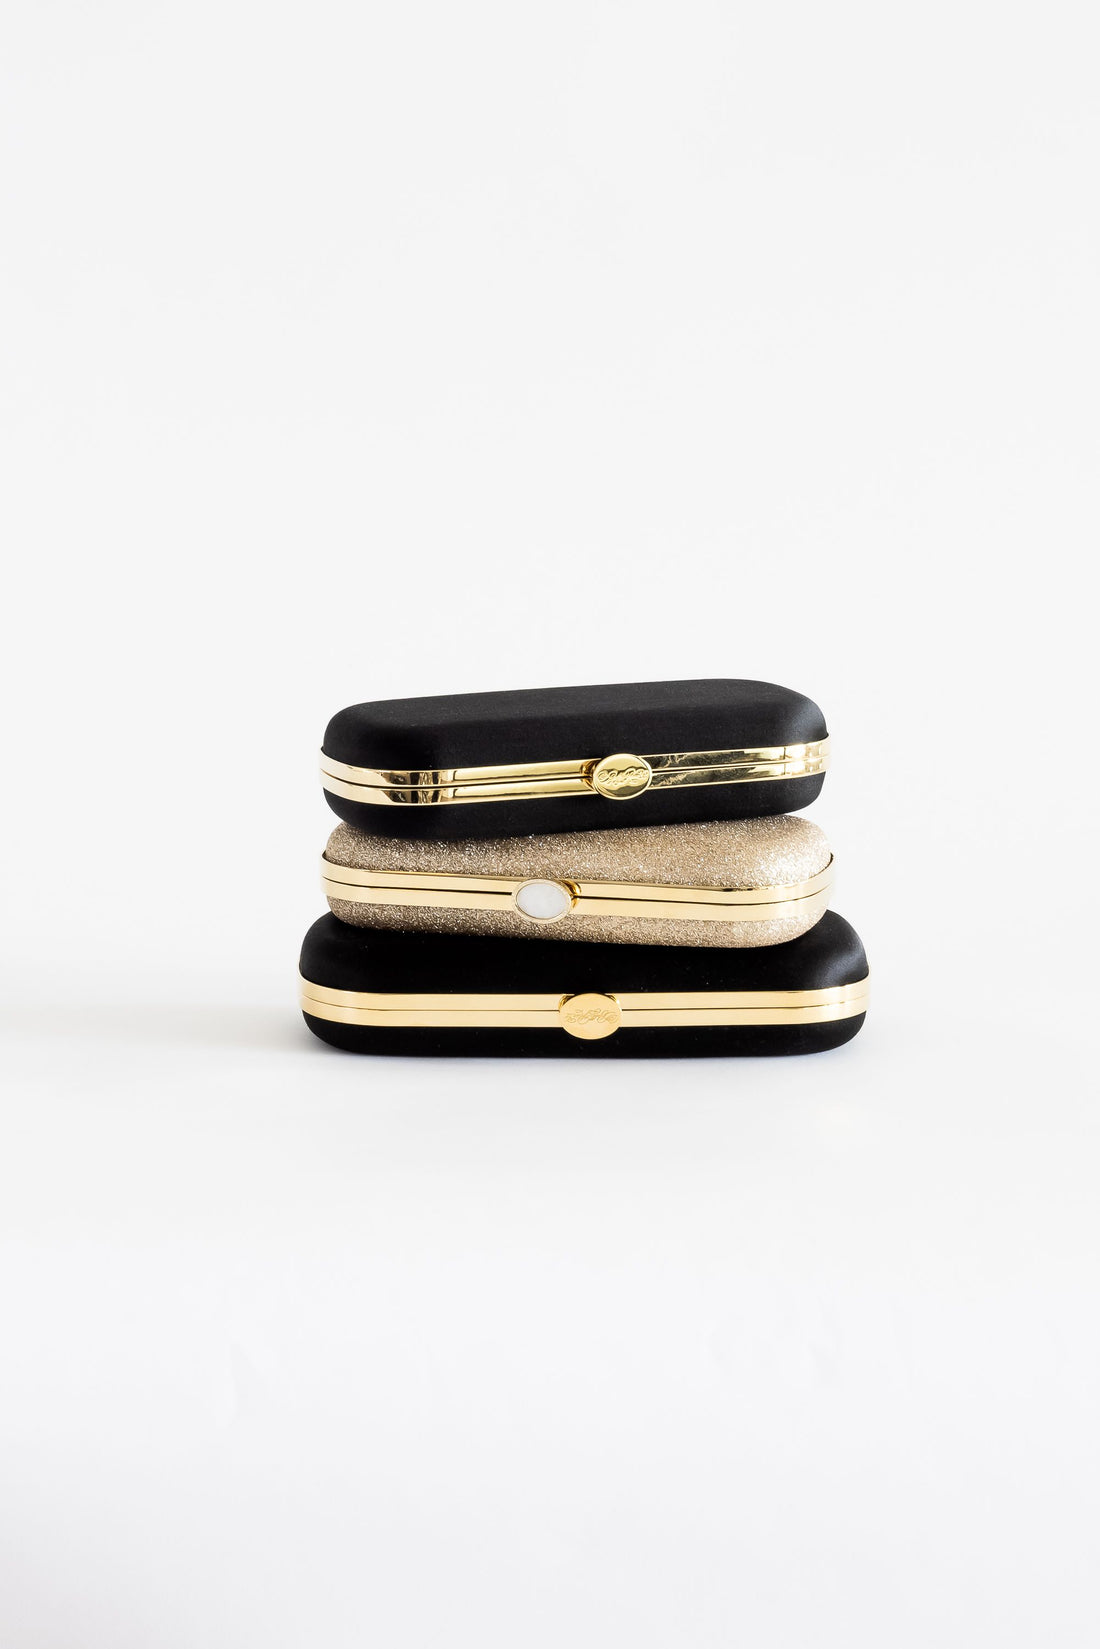 Three Black Satin Bella Clutches from The Bella Rosa Collection stacked on top of each other.